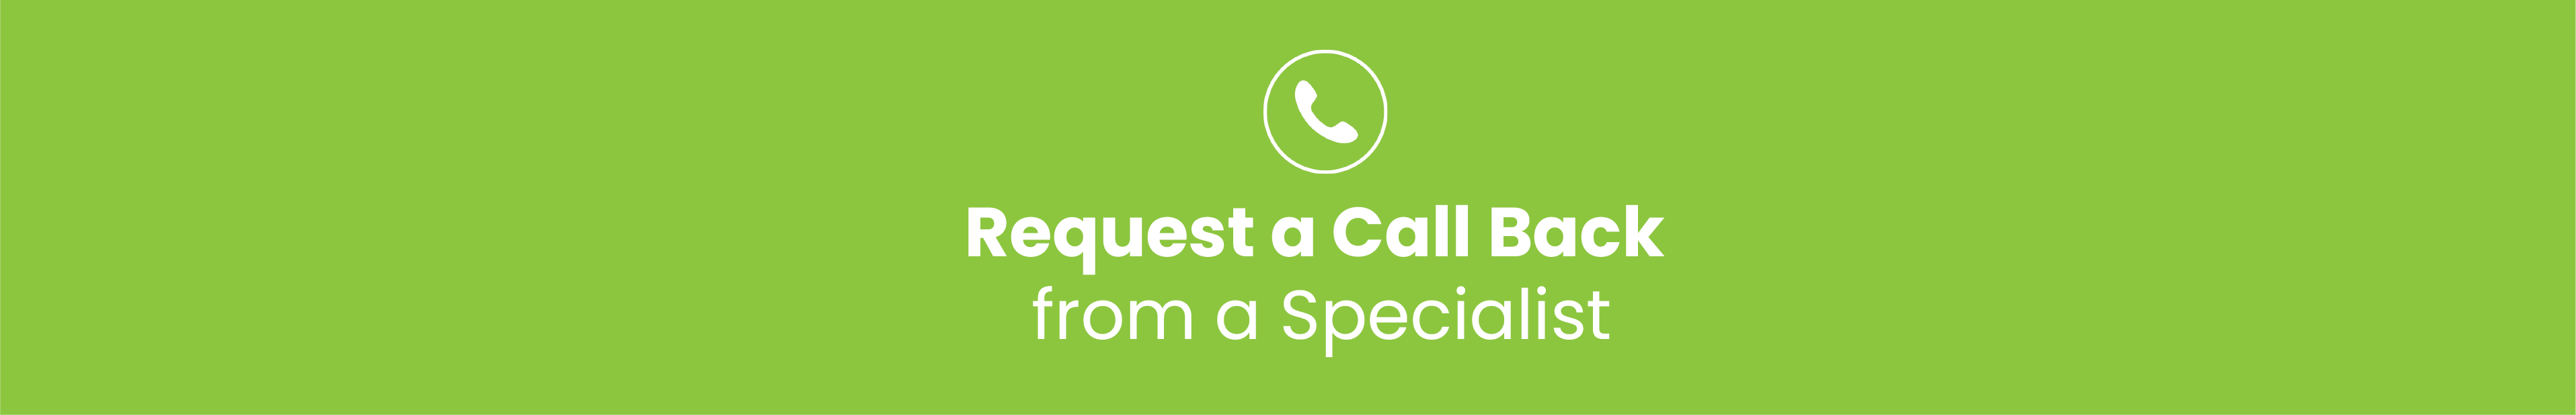 Request a call back froma specialist.